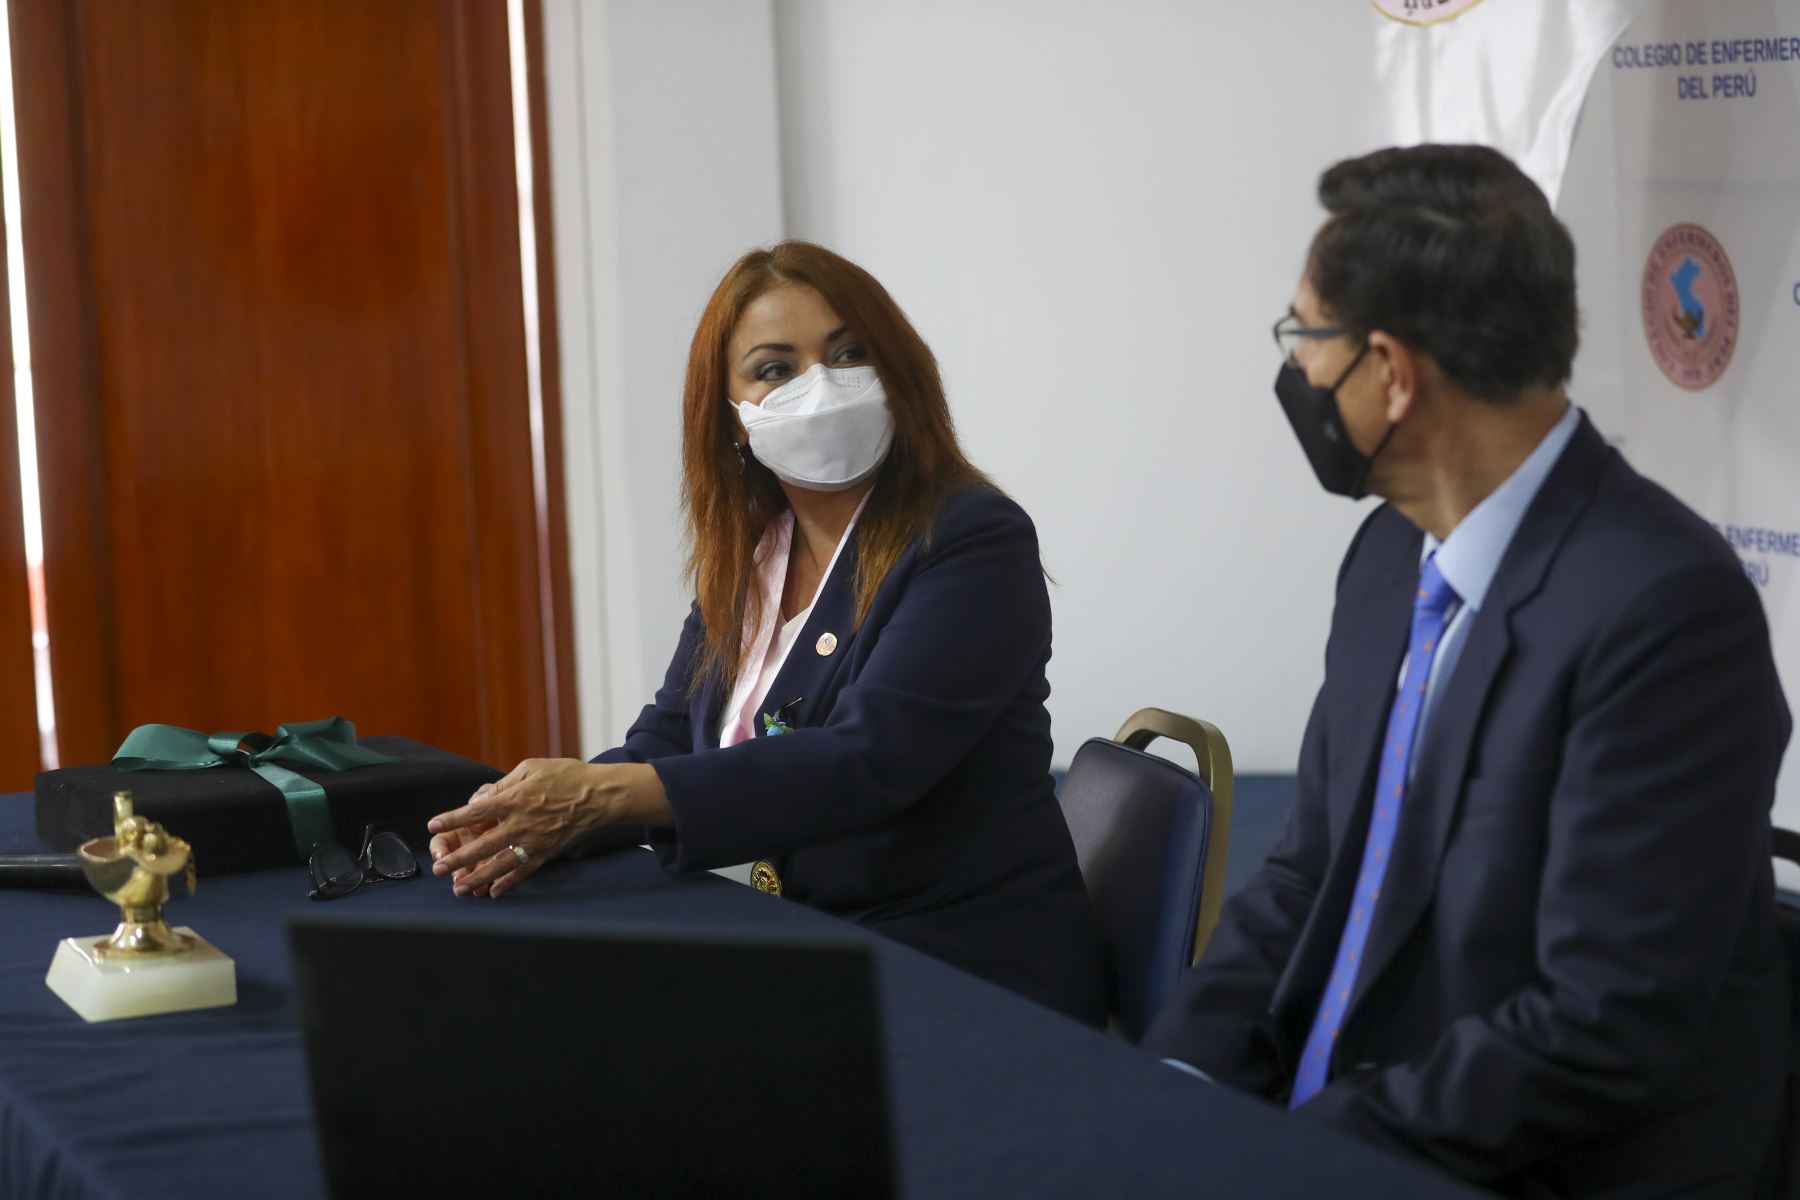 Peruvian President Martin Vizcarra arrived at the Lima-based Peruvian College of Nurses, where he greeted and recognized the work of nurses in the fight against COVID-19. Photo: ANDINA/Presidency of the Republic